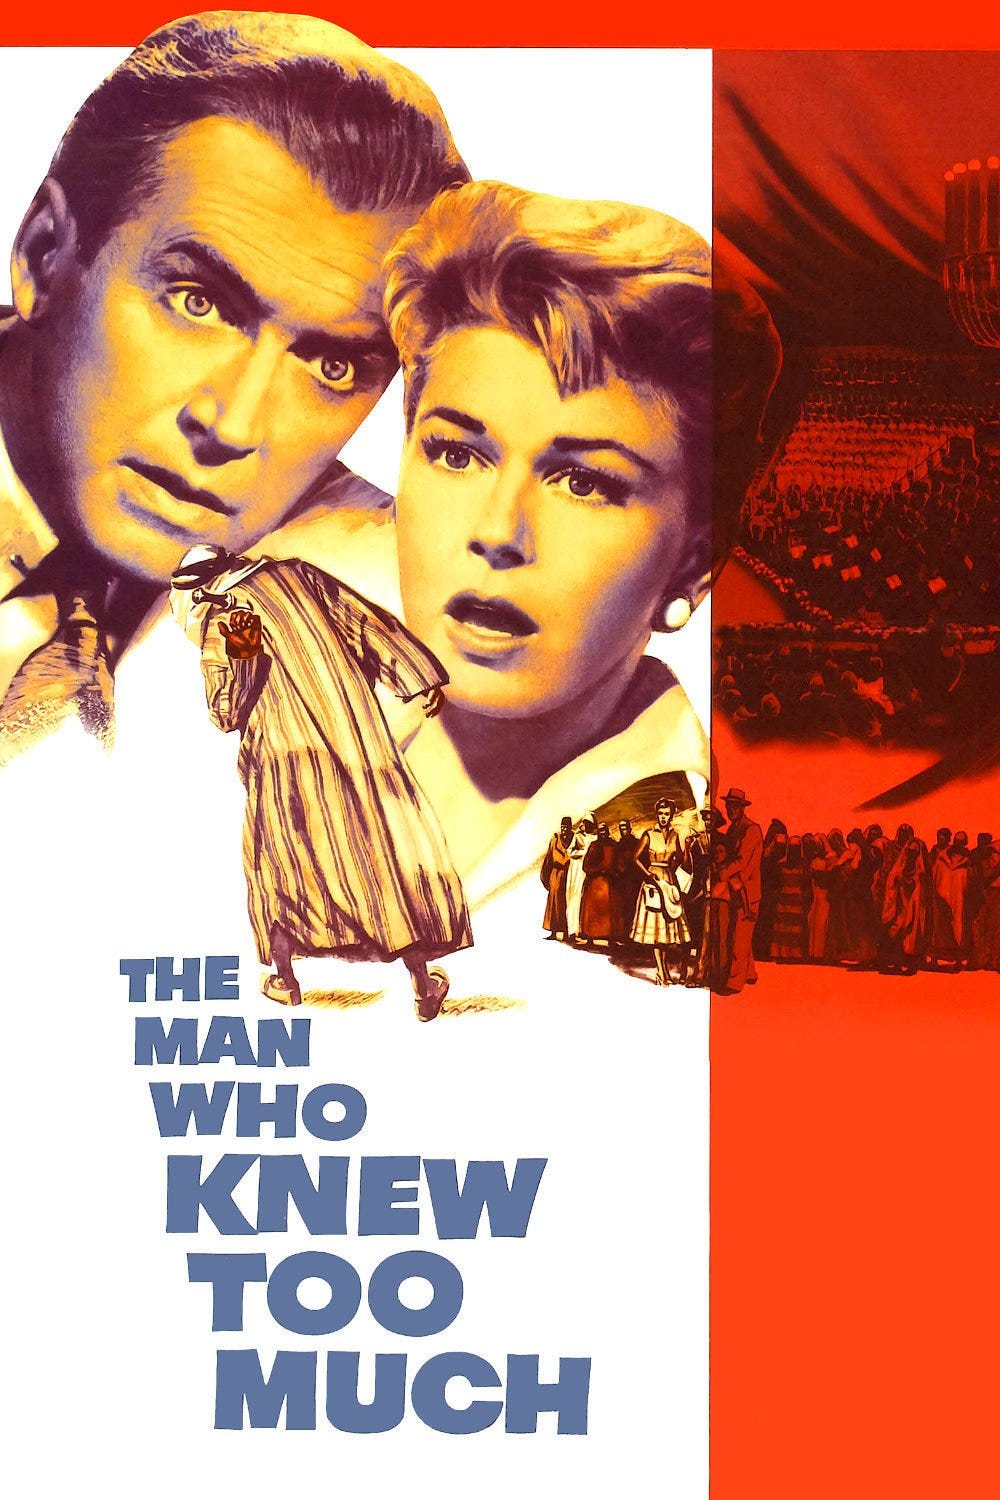 Movie Review The Man Who Knew Too Much (1956) by Patrick J Mullen